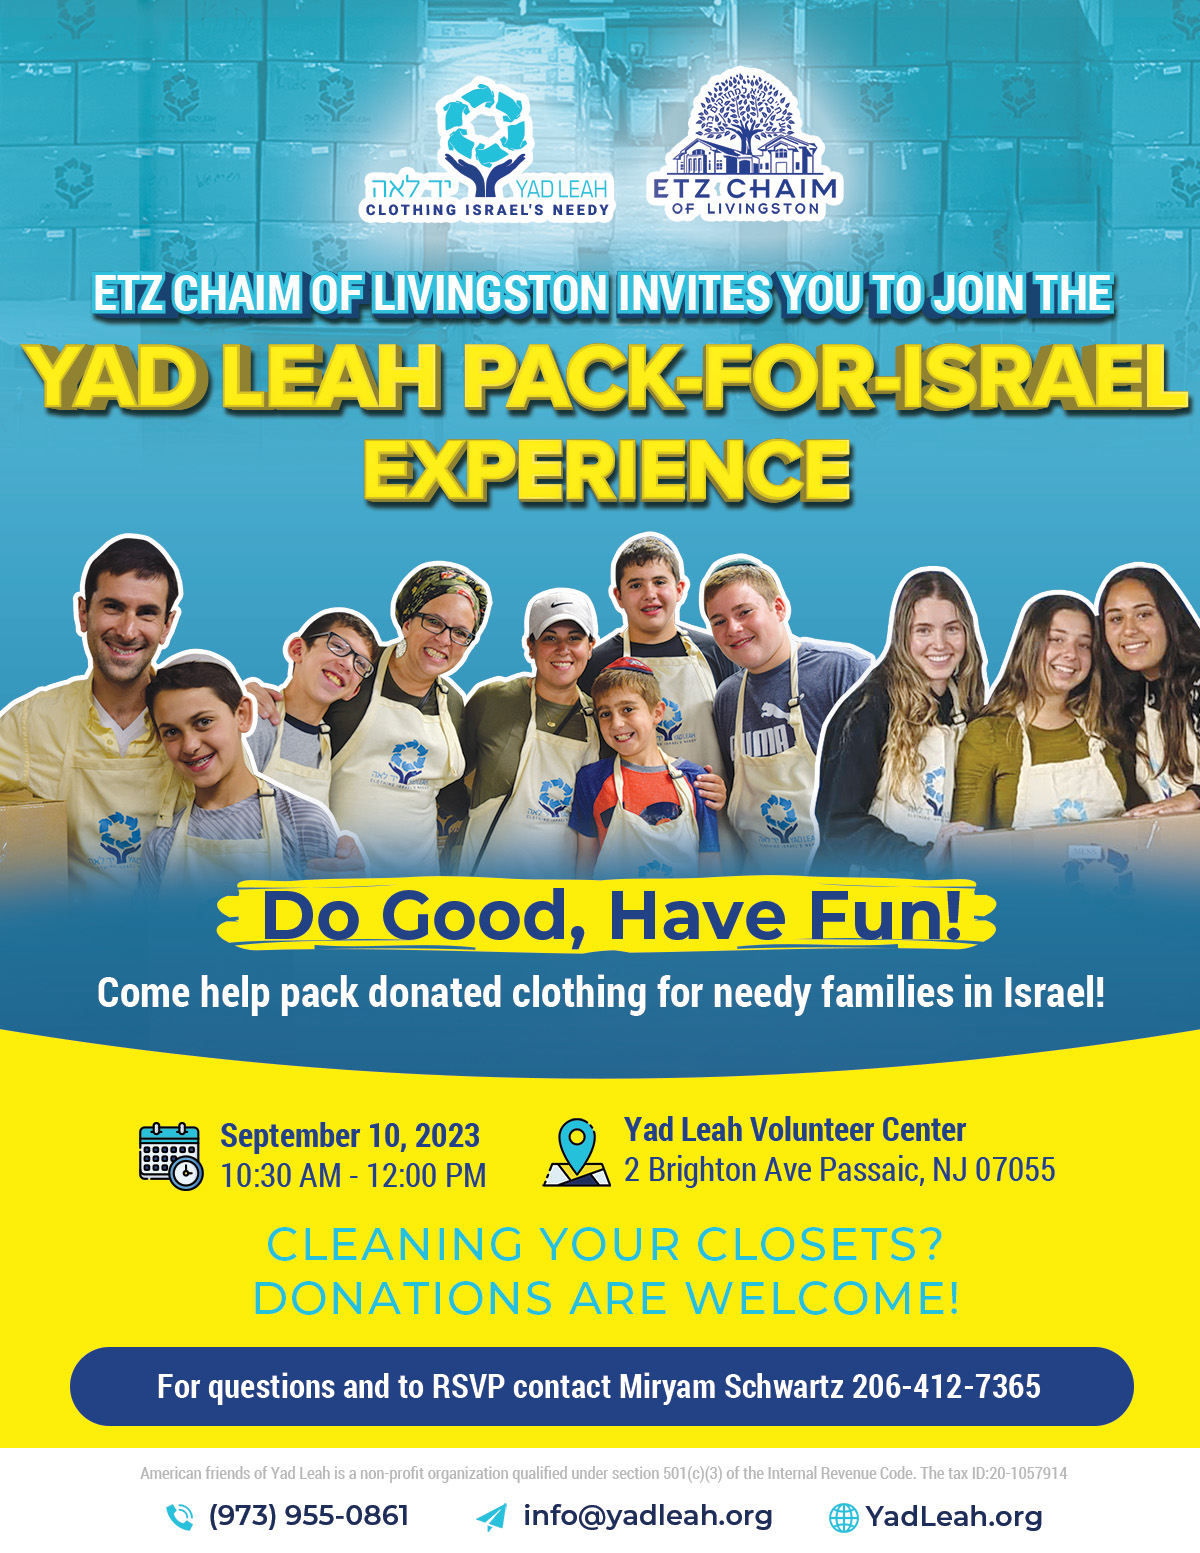 Yad Leah: Pack-For-Israel Experience